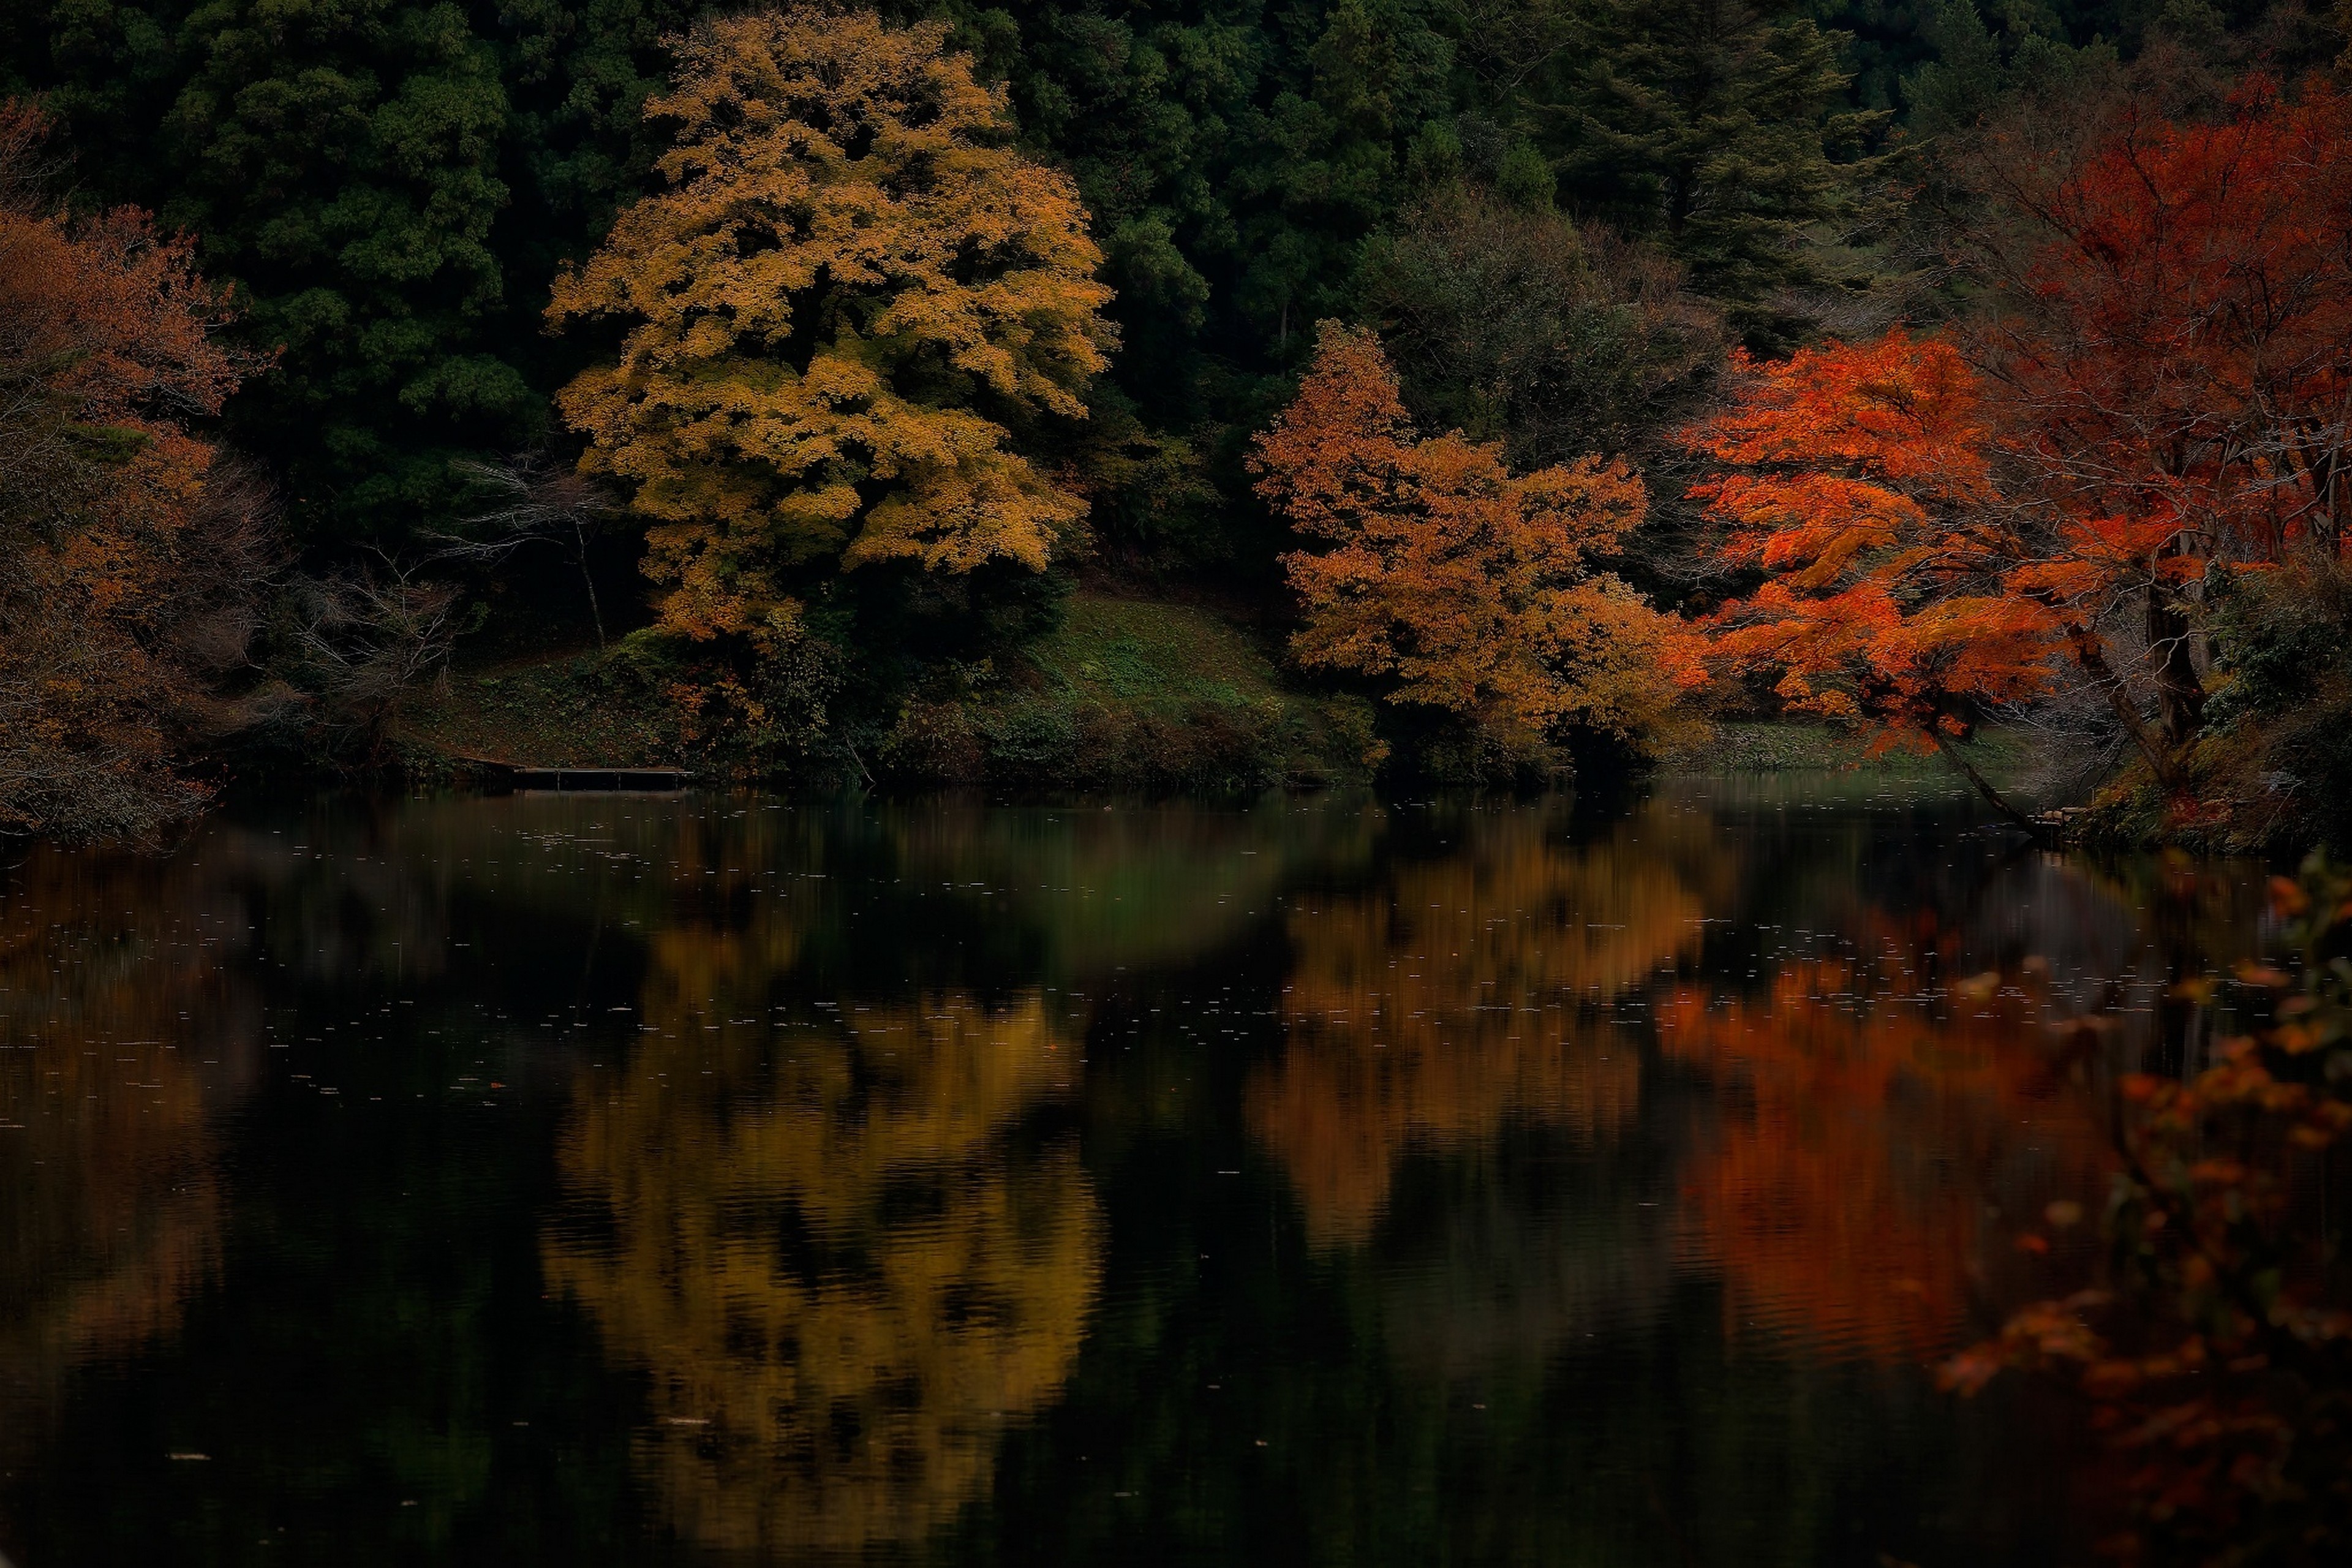 General 3840x2560 nature fall lake forest water reflection trees maple leaves colorful low light